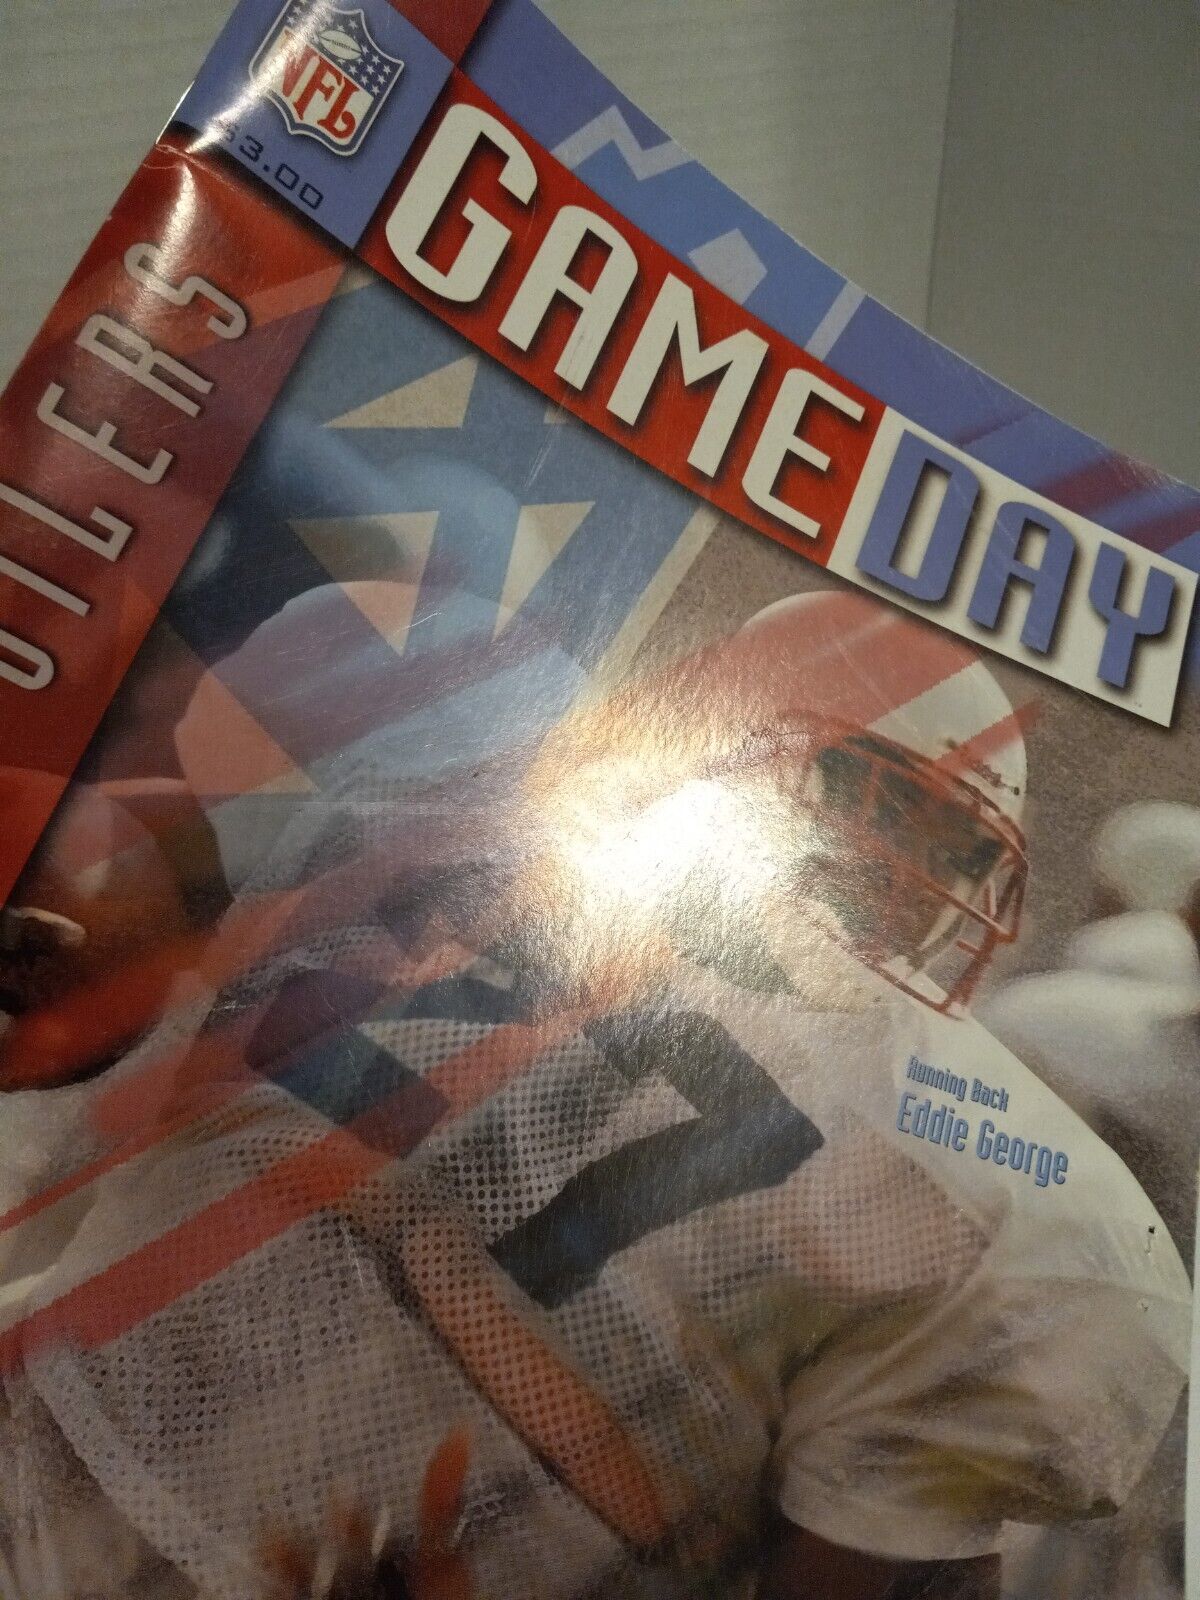 Nfl Game Day Oilers Vs Saints Program August 2 1997 Tennessee oilers football 